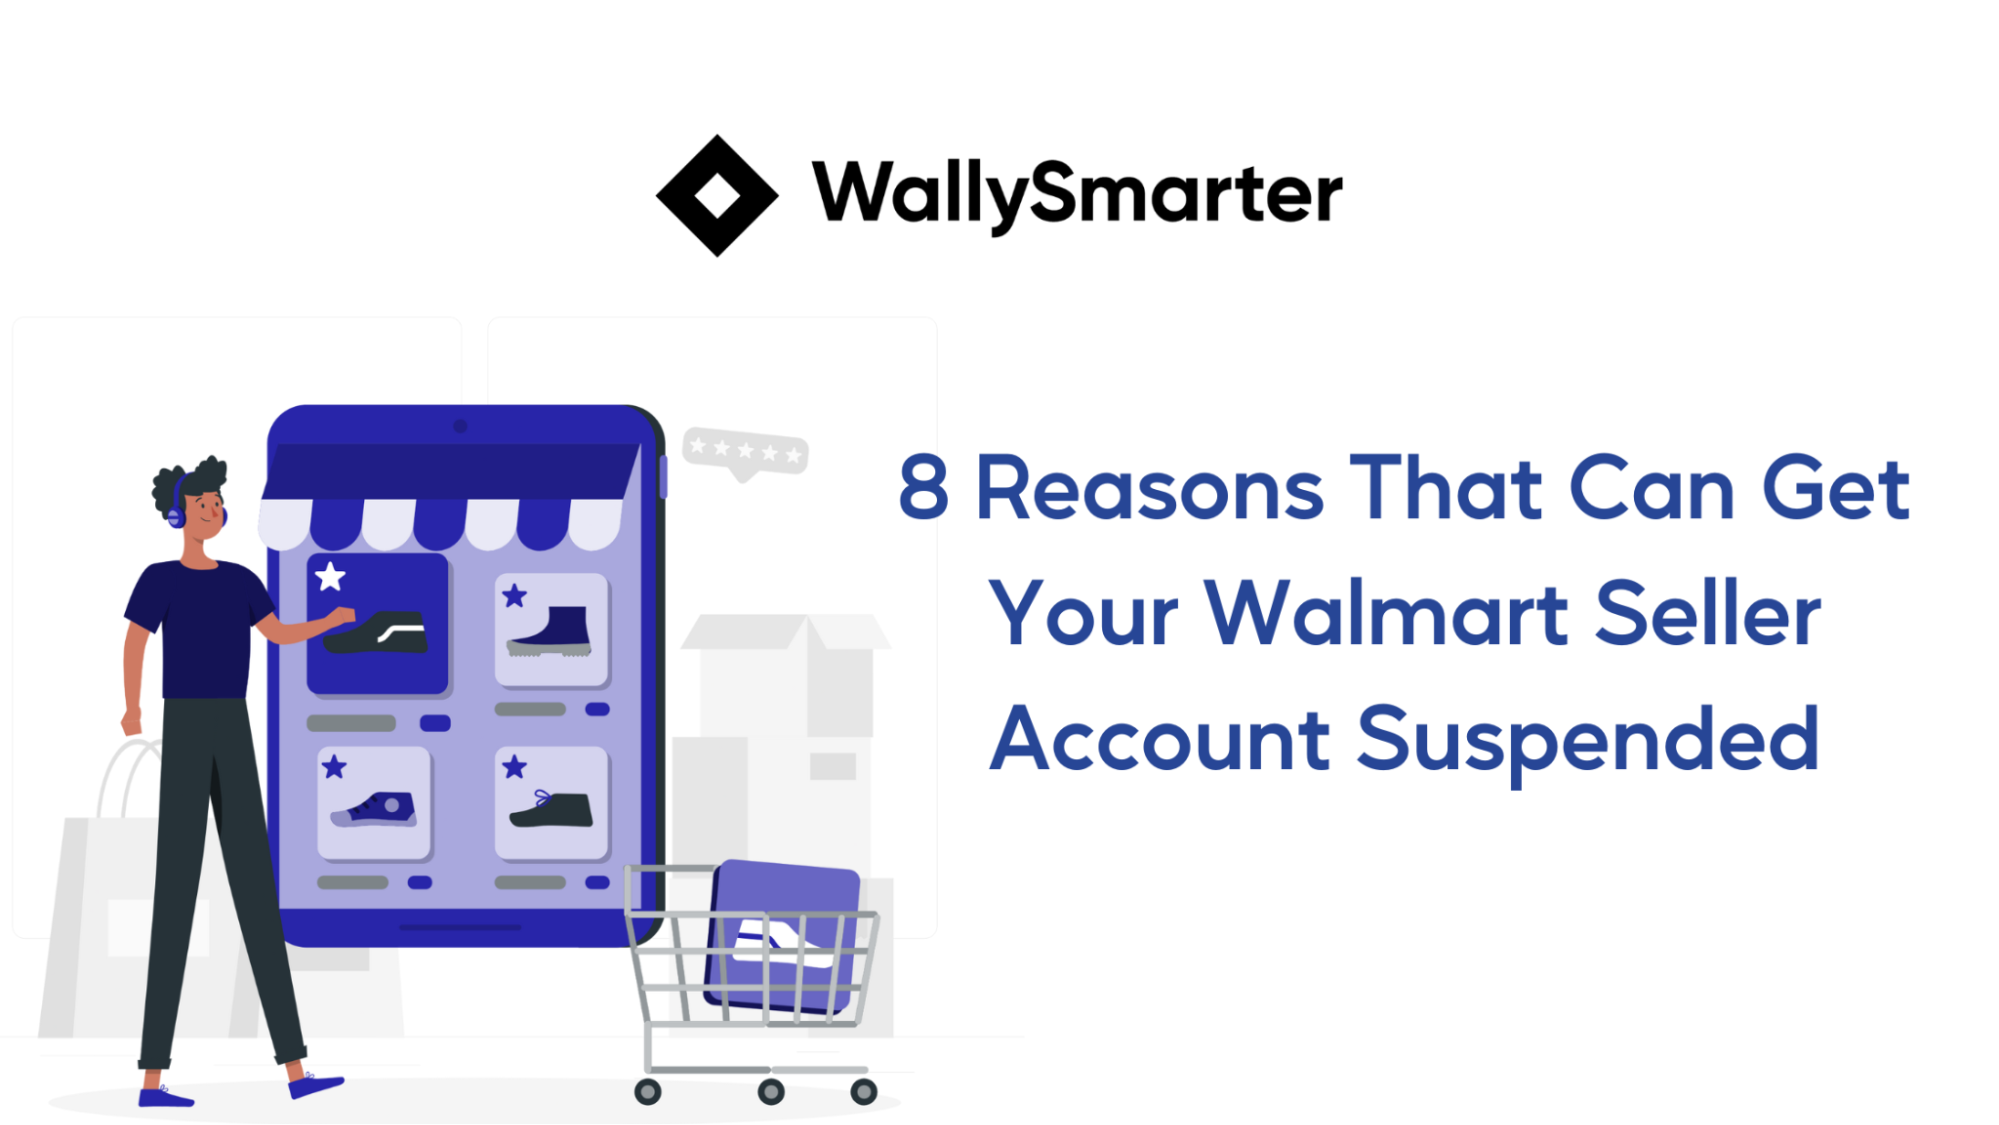 8 Reasons That Can Get Your Walmart Seller Account Suspended